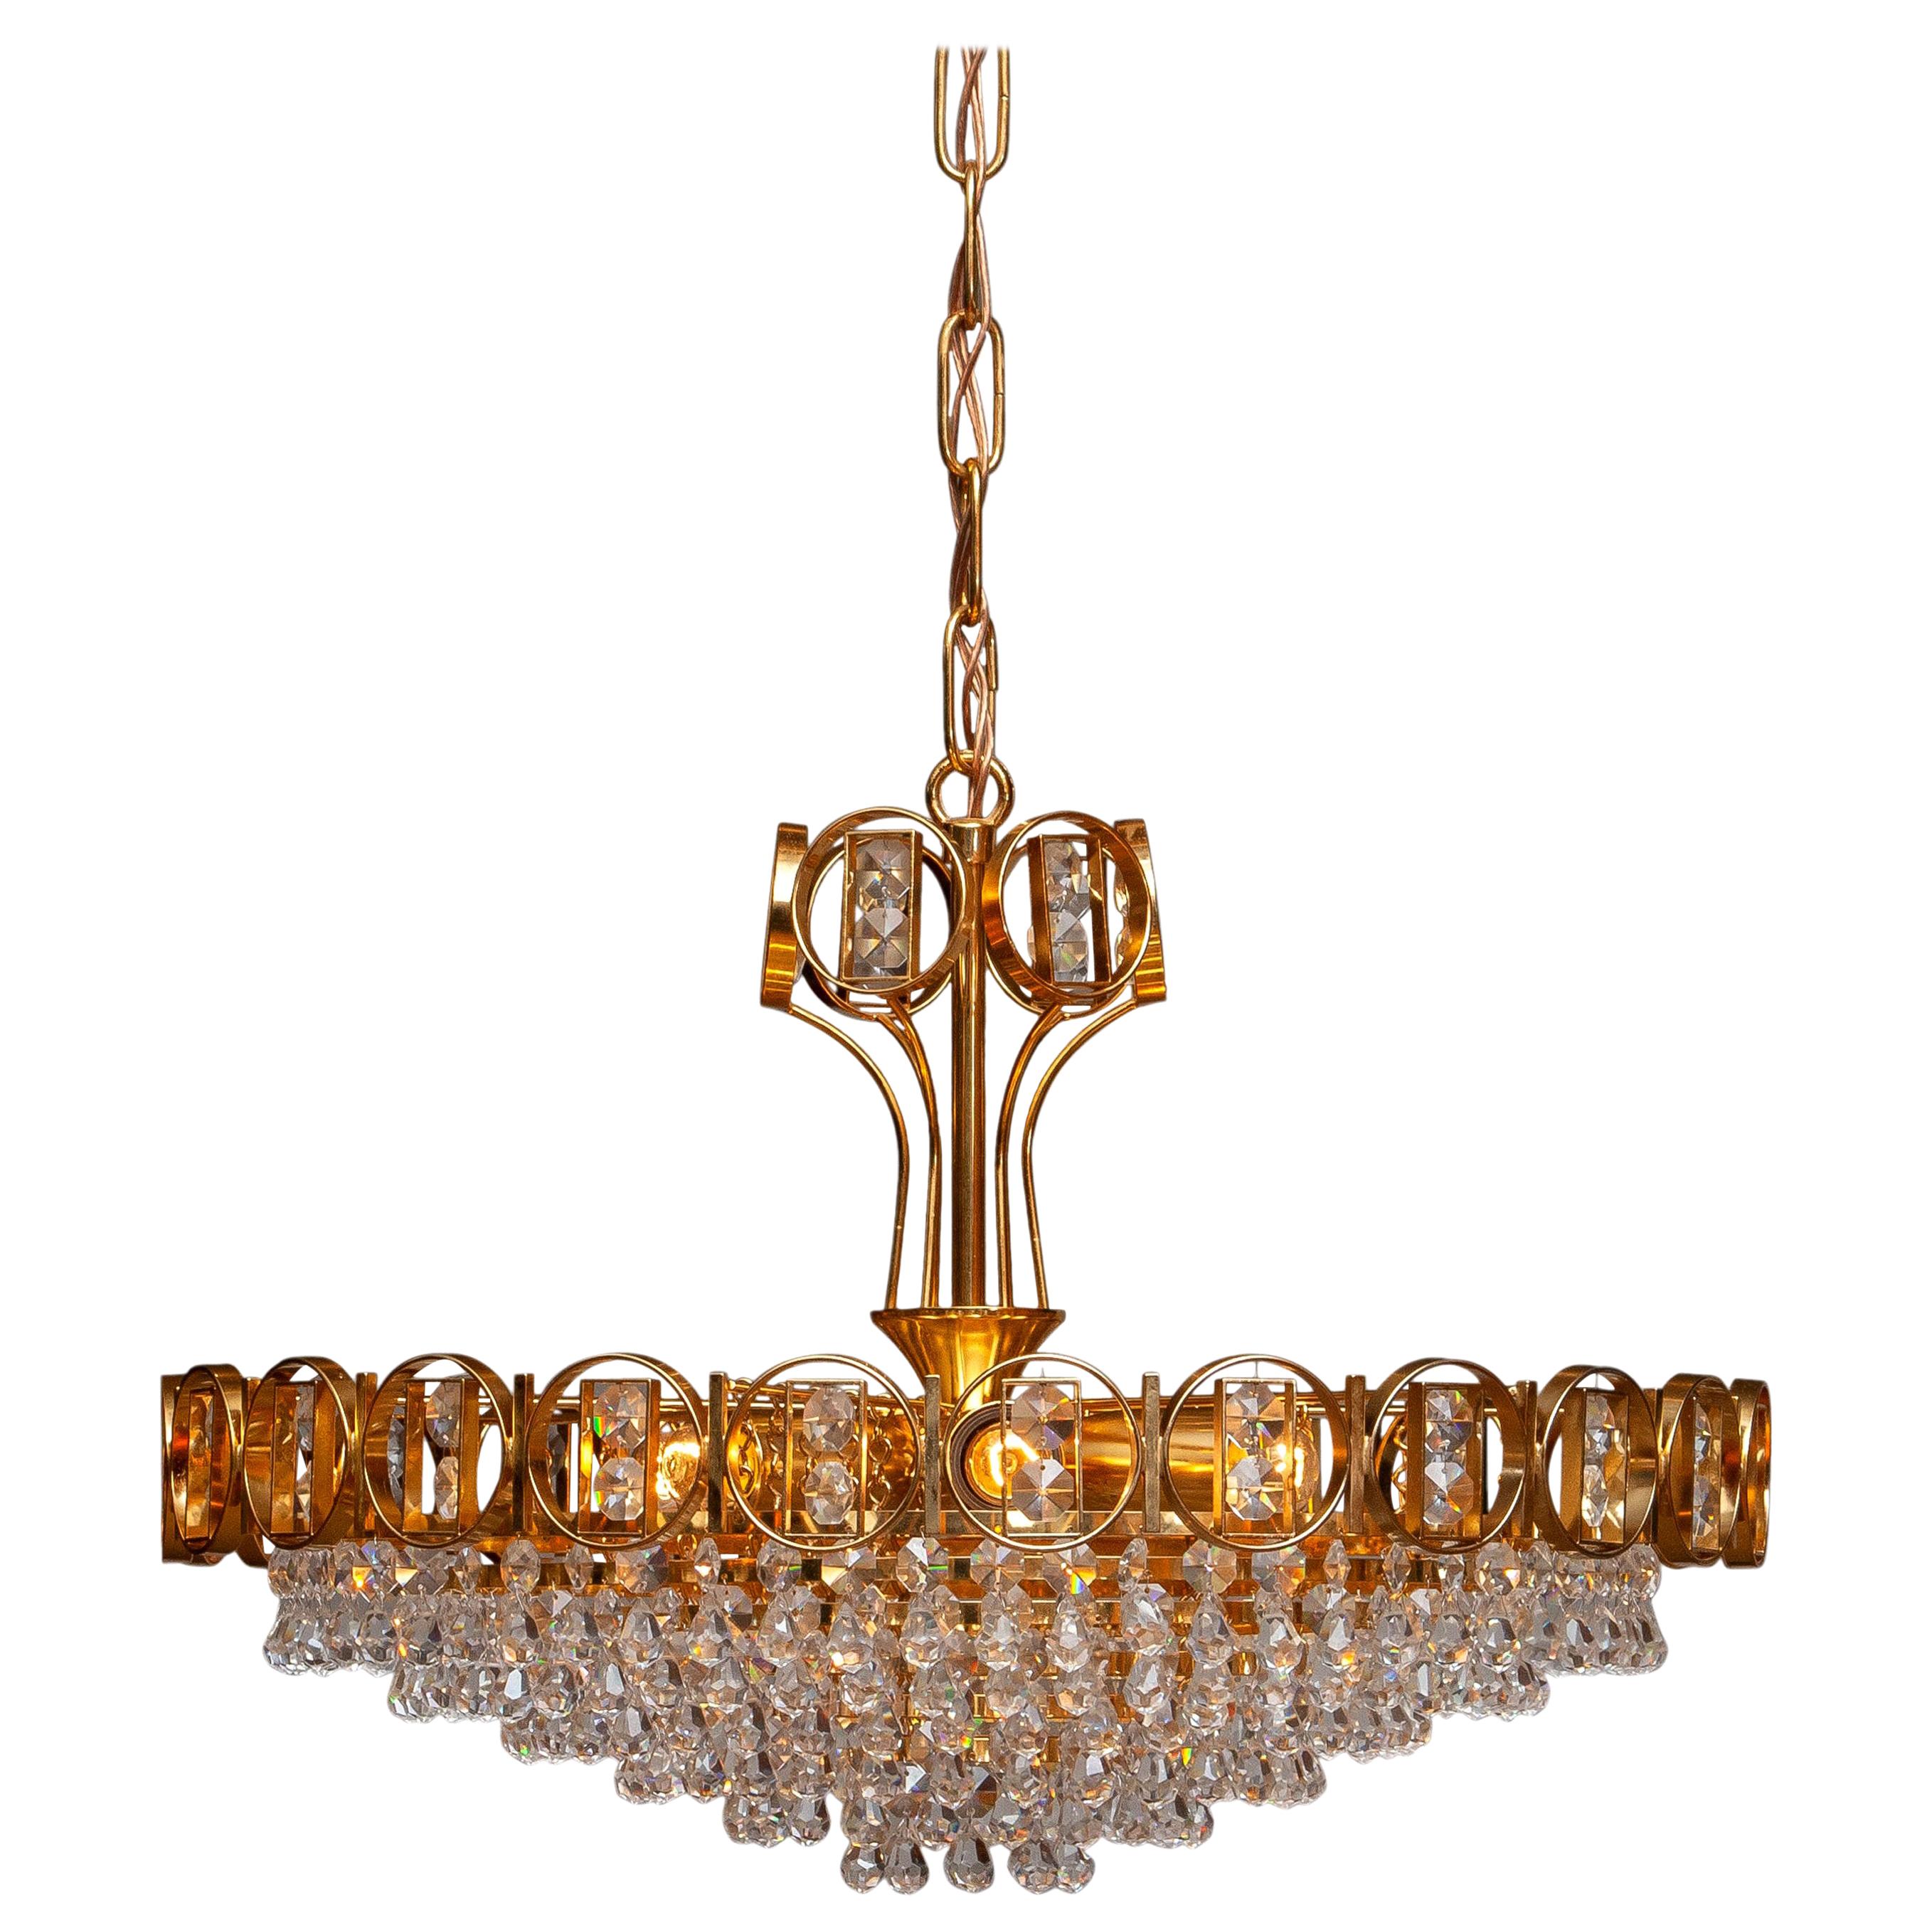 Beautiful brass gilded chandelier filed with faceted crystals made by Palwa, Germany, 1970.
This chandelier consists out of a gold-plated crown with inside six gold plaited rings filed with crystals and on top also a smaller gold plaited